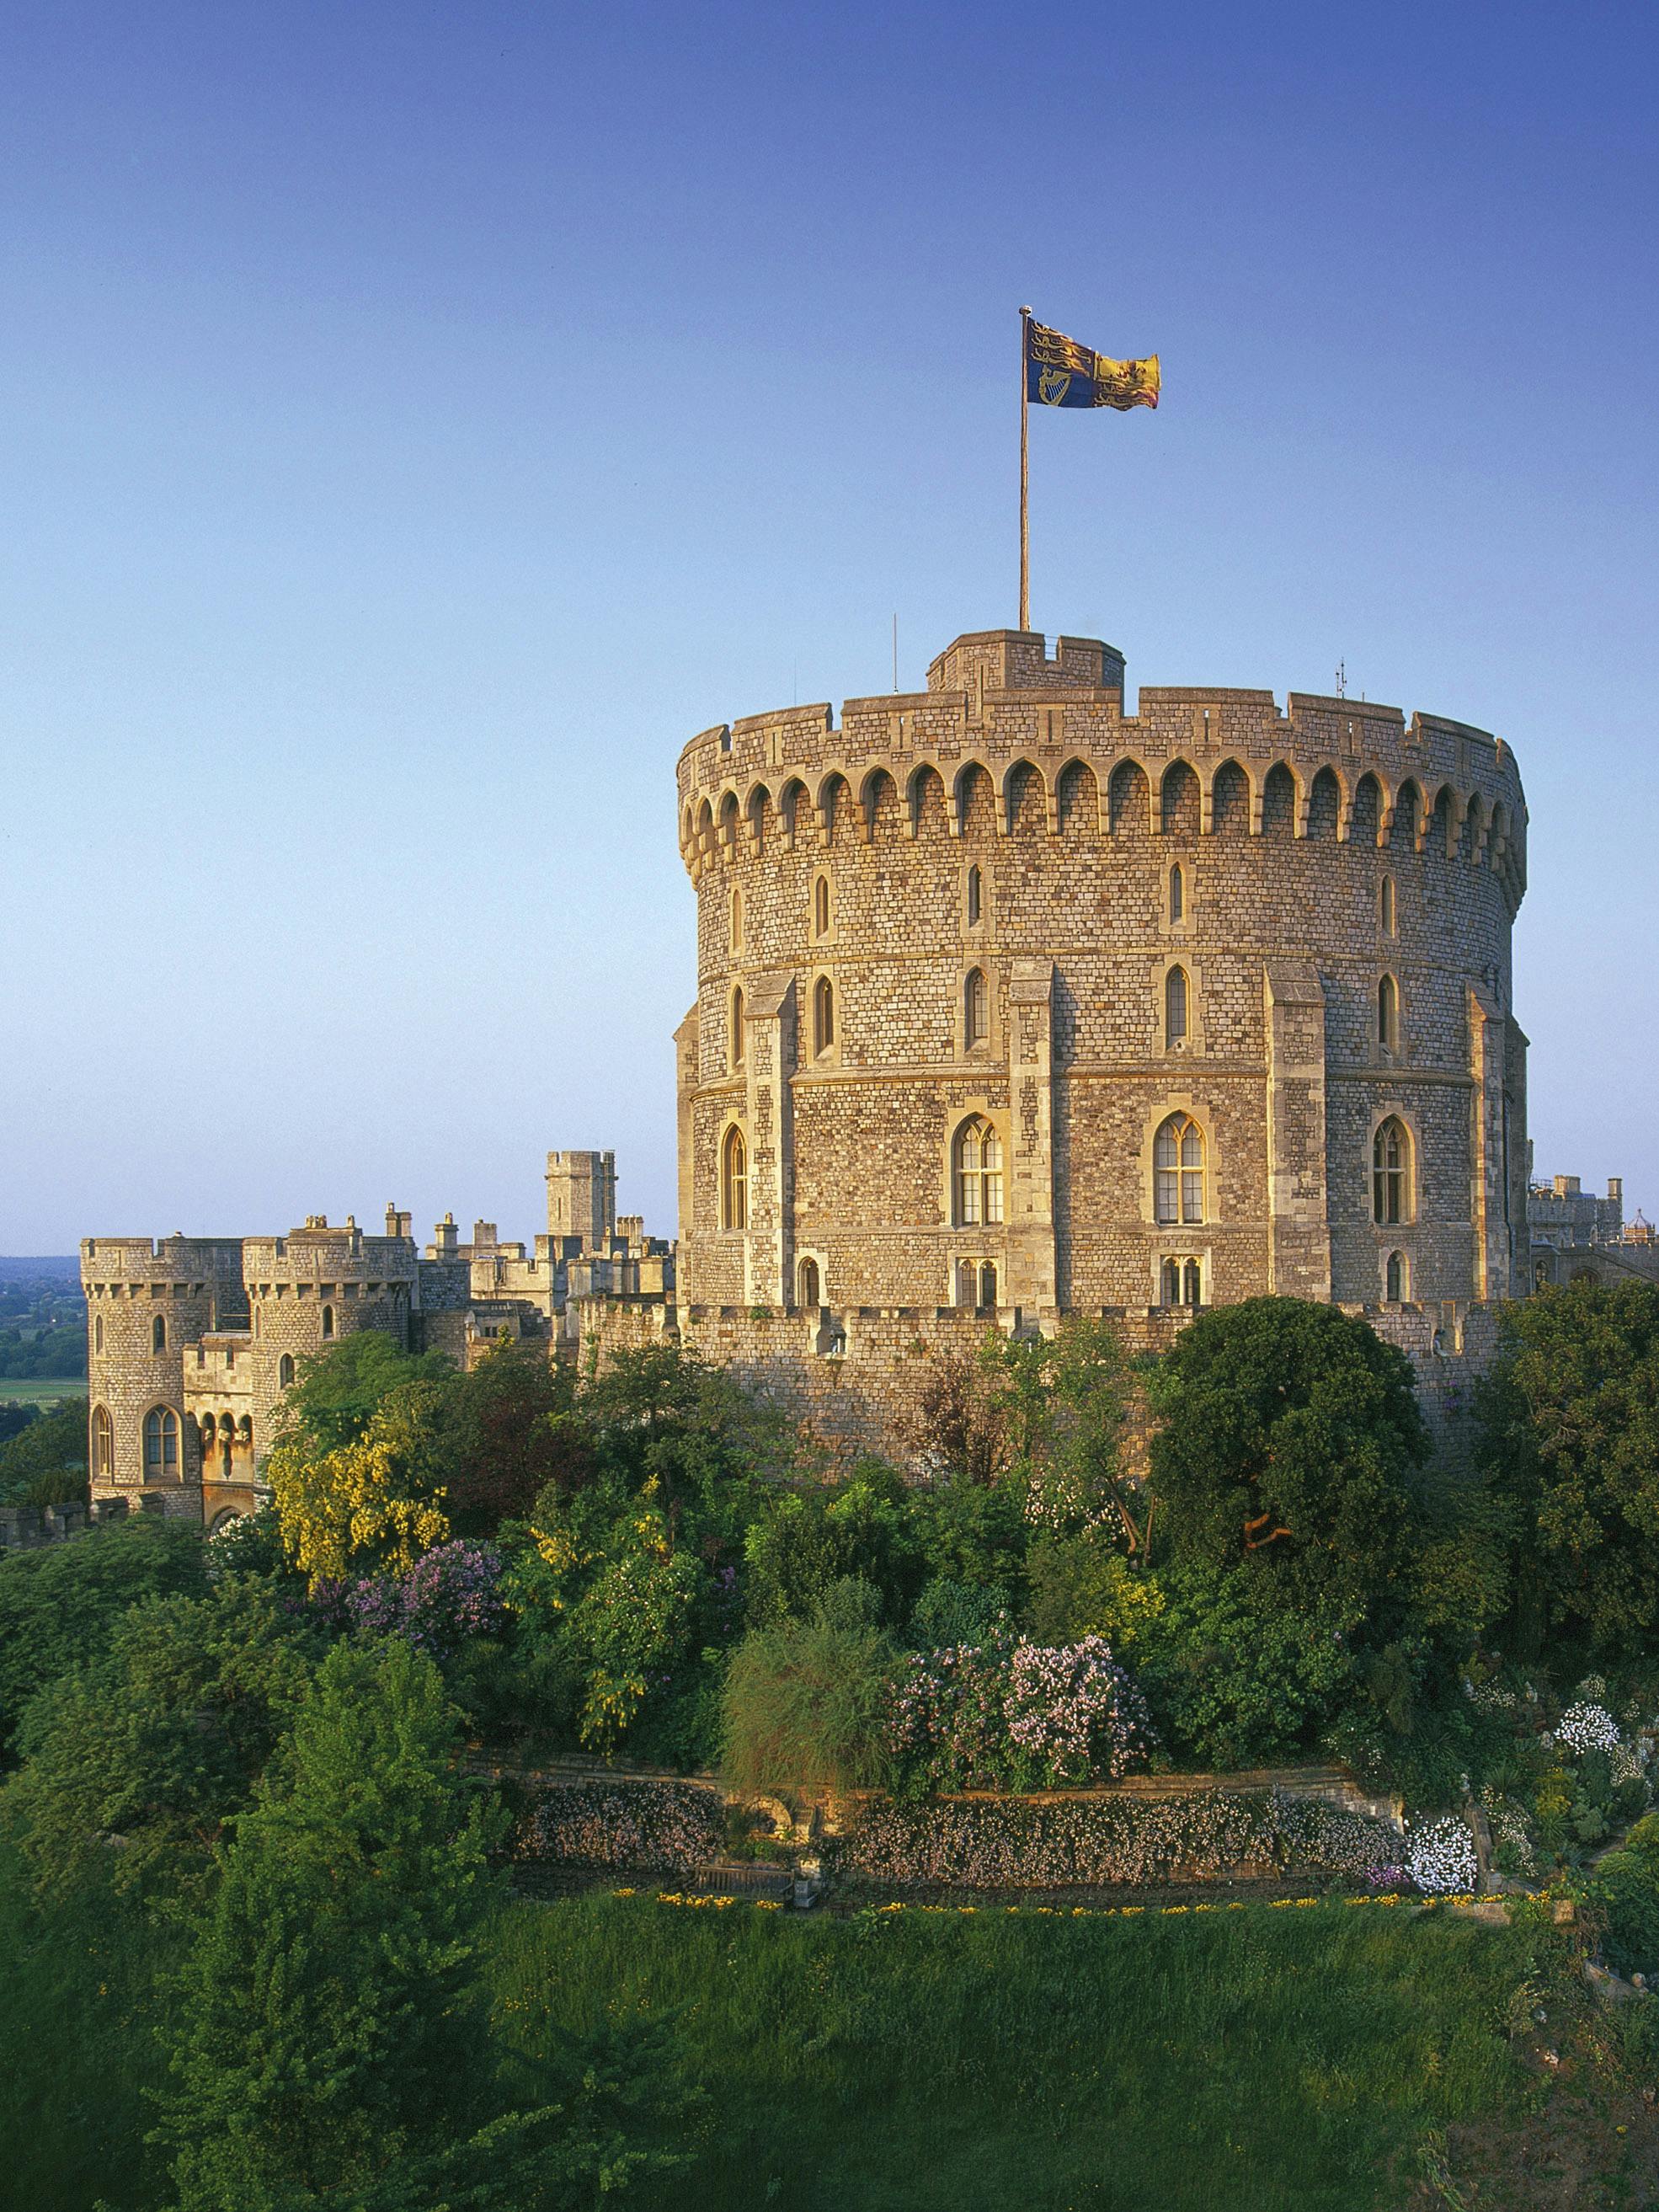 Guided Tour to Windsor Castle with Afternoon Tea From London